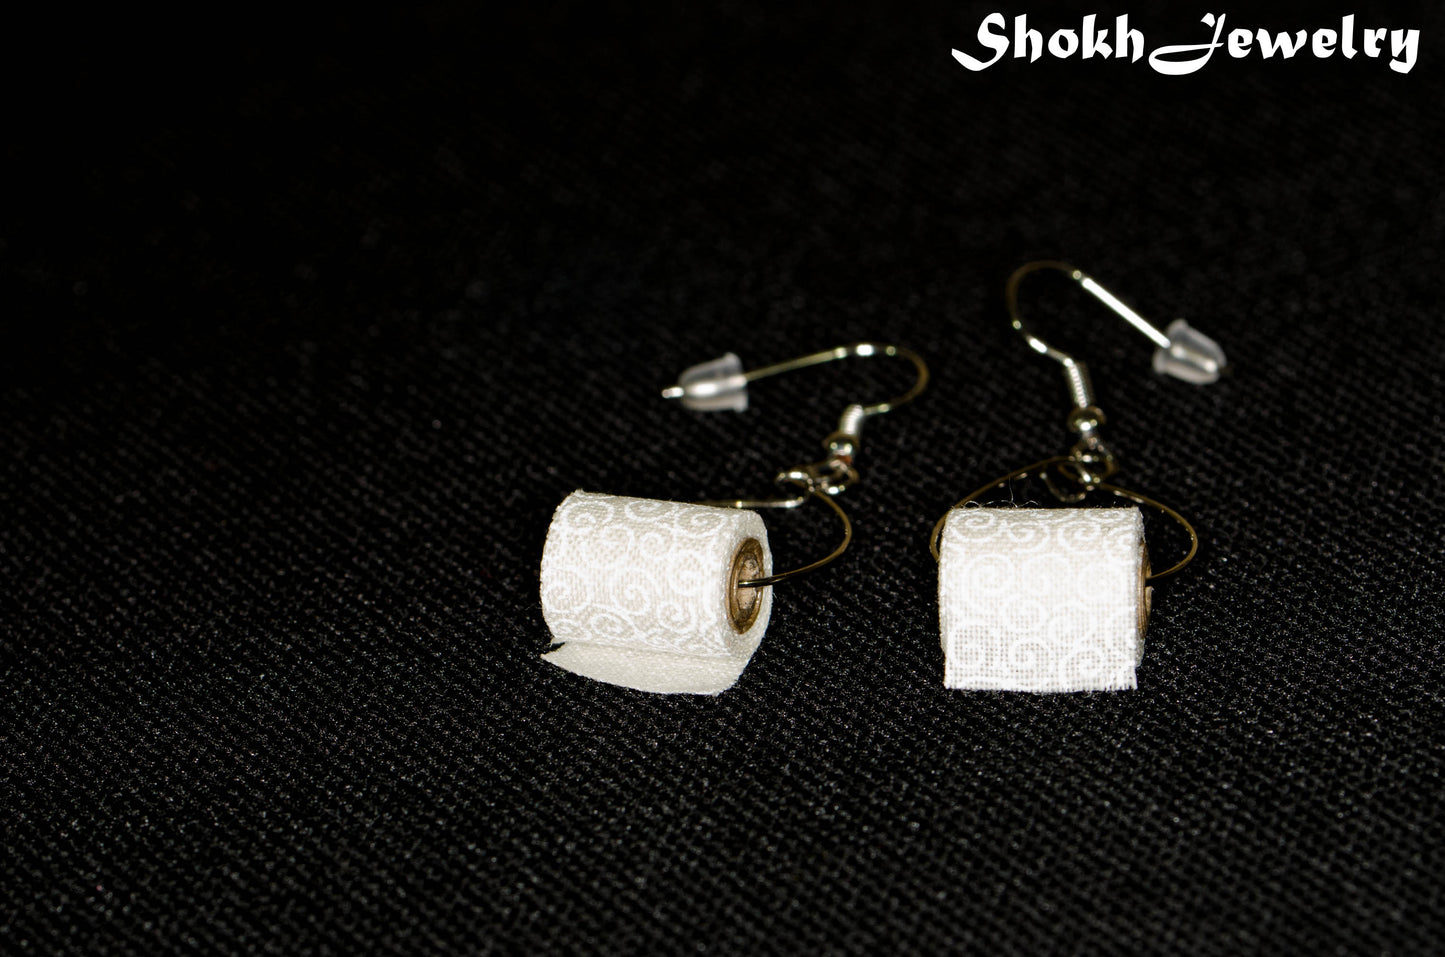 Close up of Miniature Toilet Paper Roll Earrings.